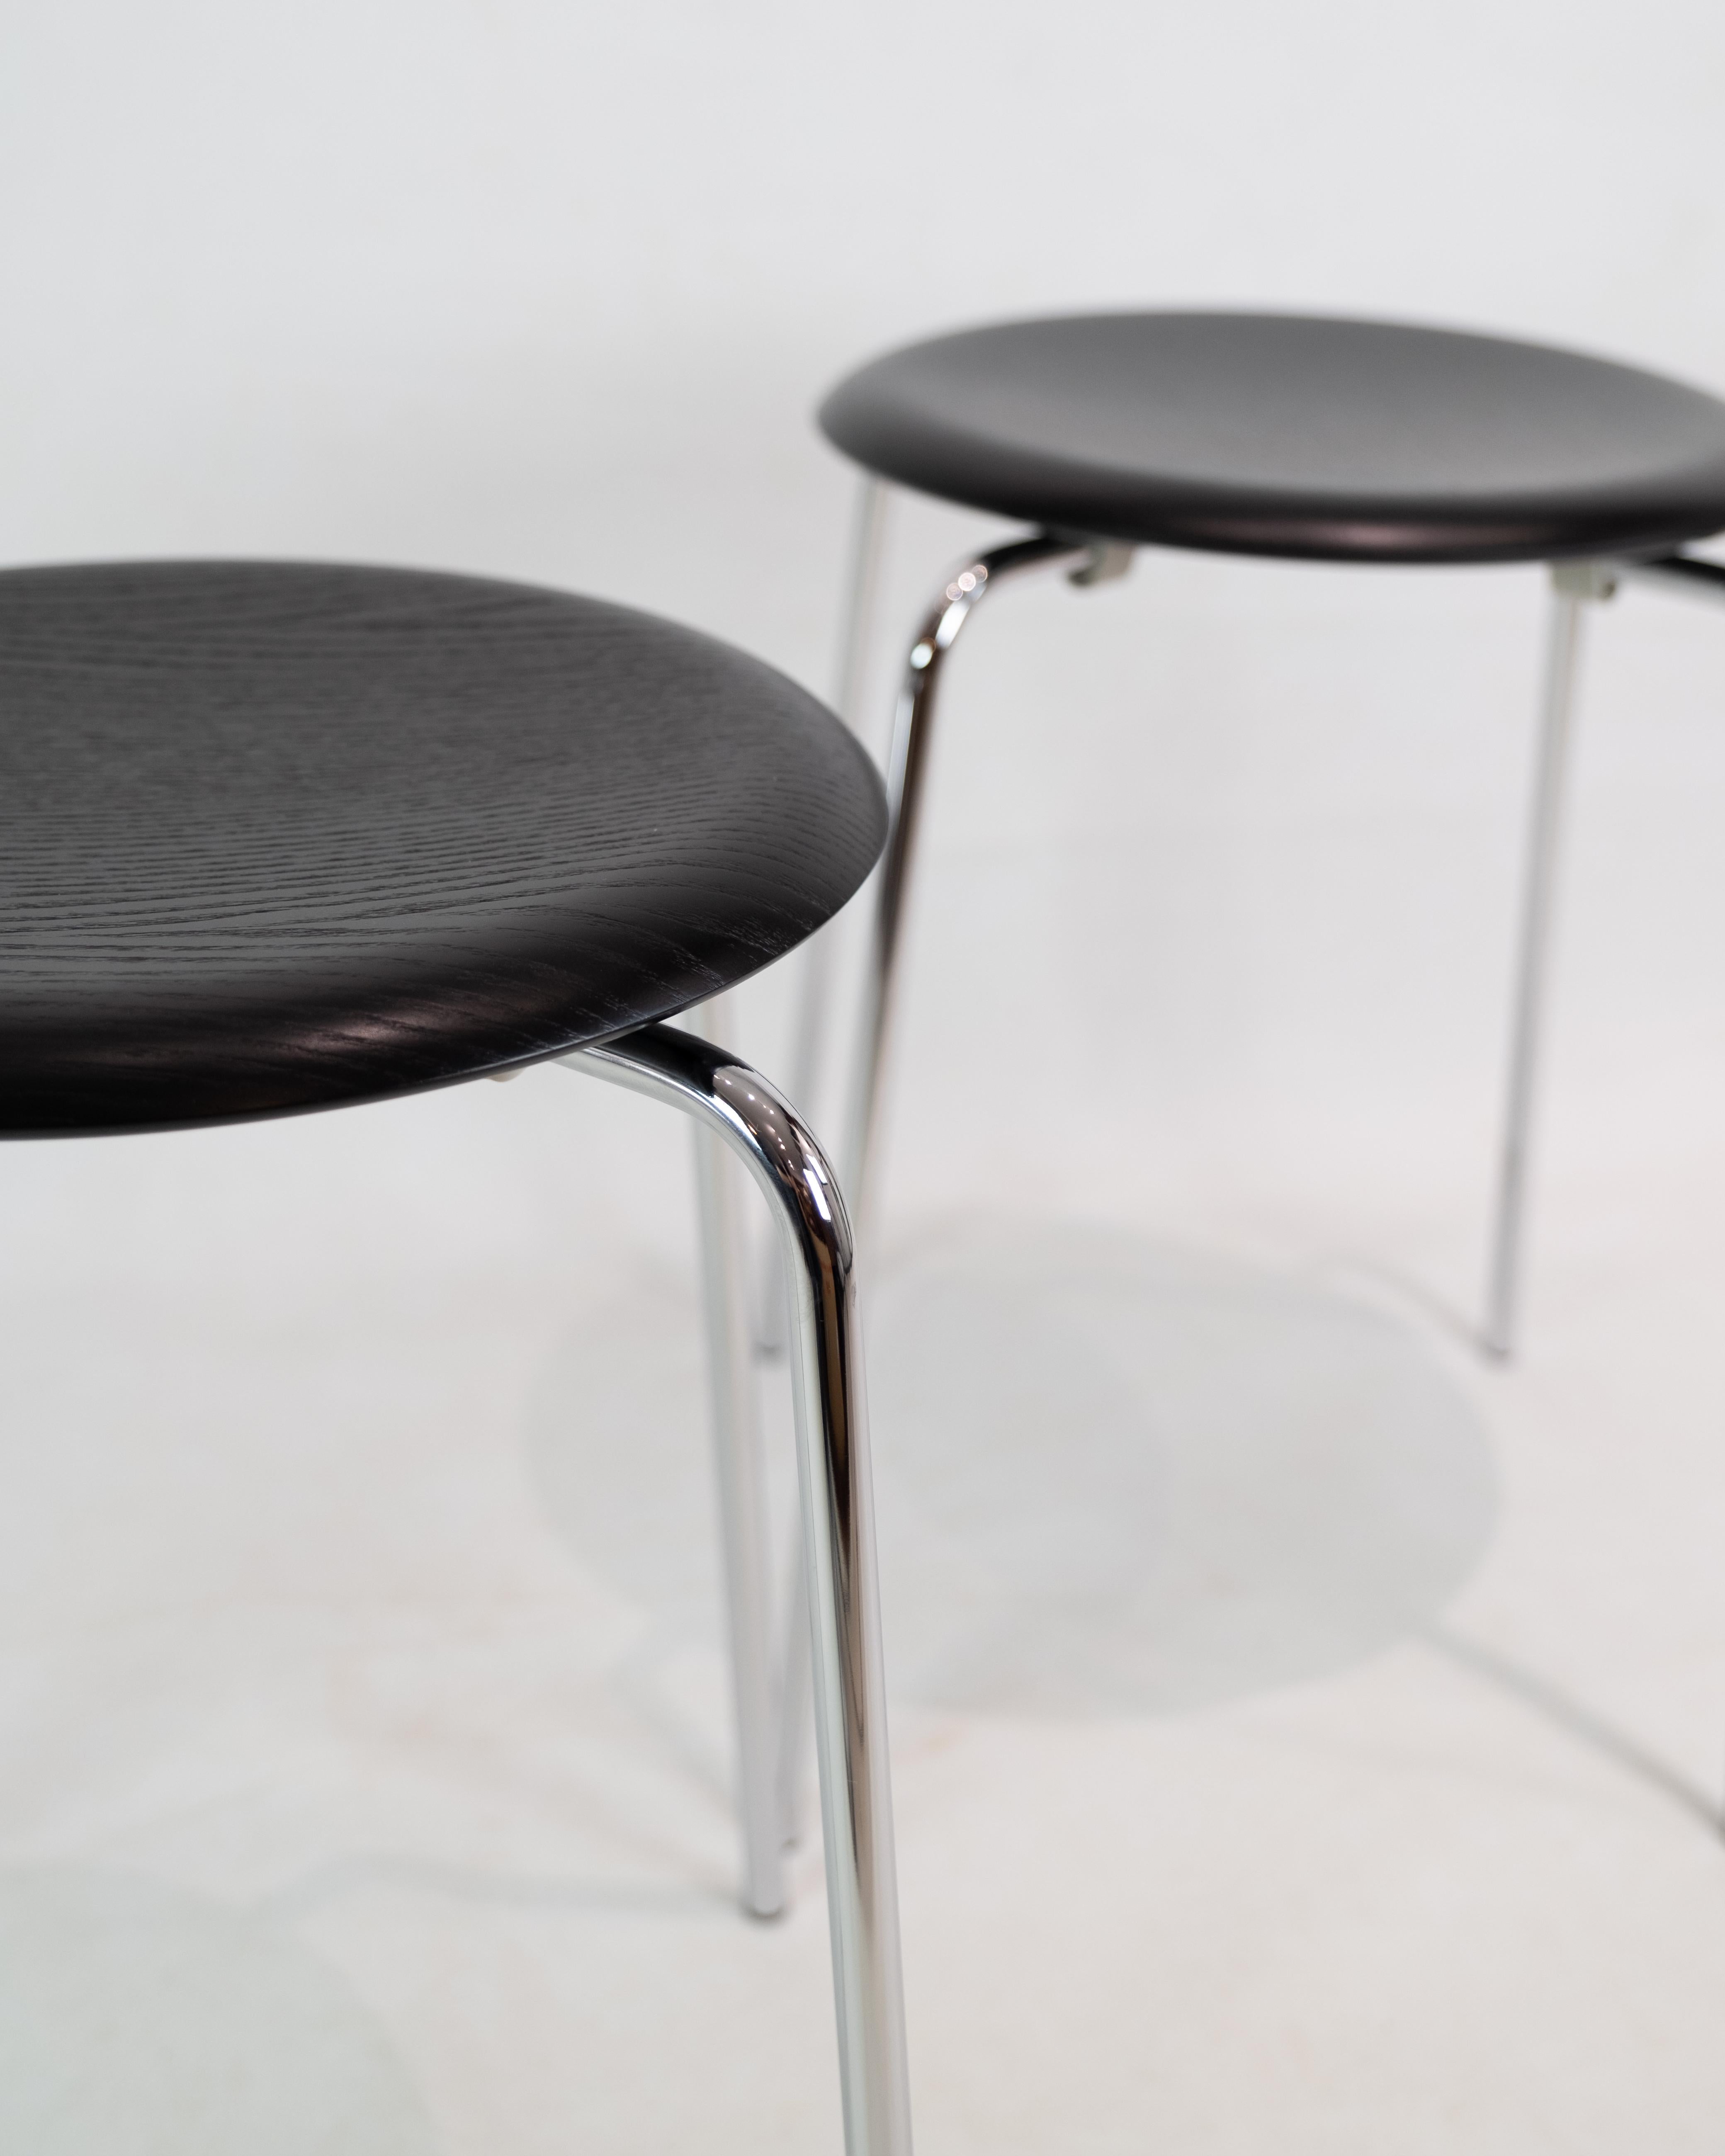 Black Ash Dot Footstools by Arne Jacobsen Produced by Fritz Hansen  In Excellent Condition For Sale In Lejre, DK